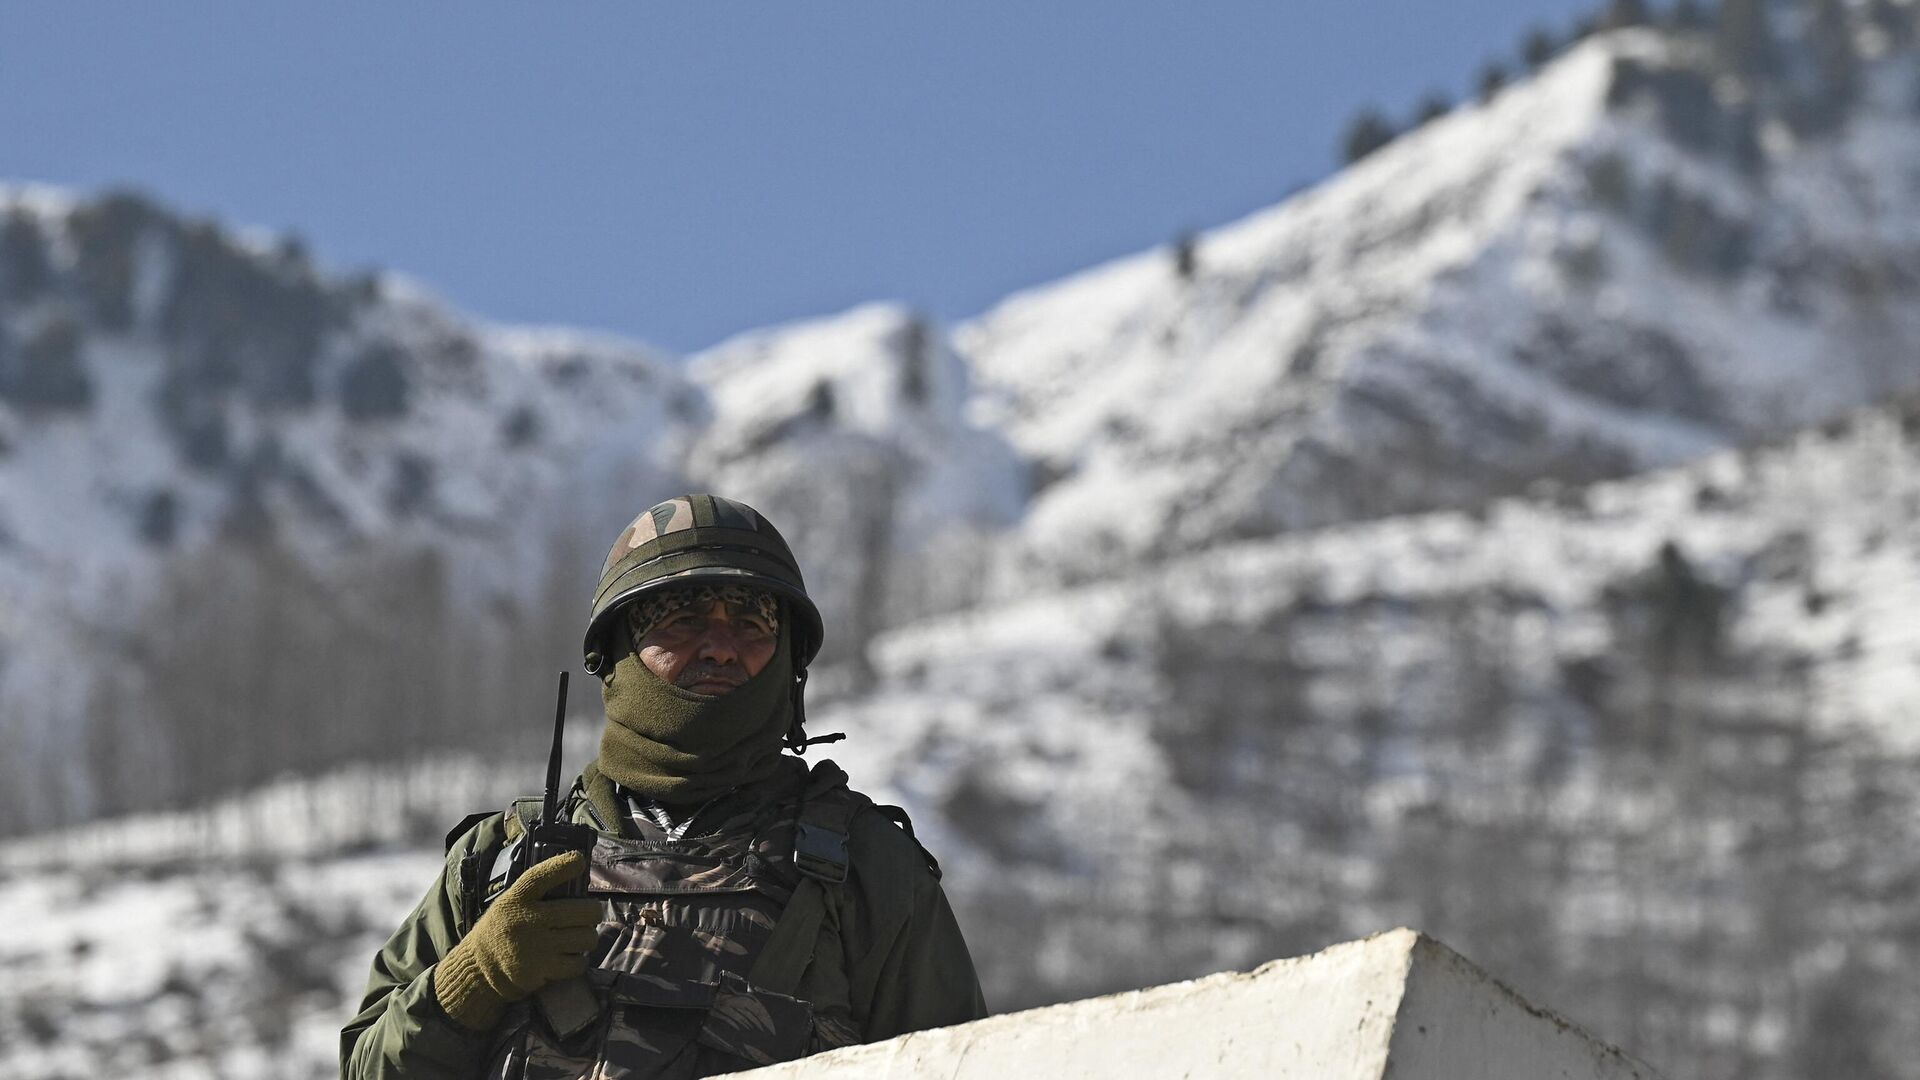 An Indian security personnel stands guard as Indian Congress leader Rahul Gandhi and former Chief Minister of Jammu and Kashmir Omar Abdullah (not pictured) walk during the 'Bharat Jodo Yatra' march in Banihal, some 94 Km from Srinagar in Kashmir, on January 27, 2023. - Sputnik India, 1920, 27.01.2023